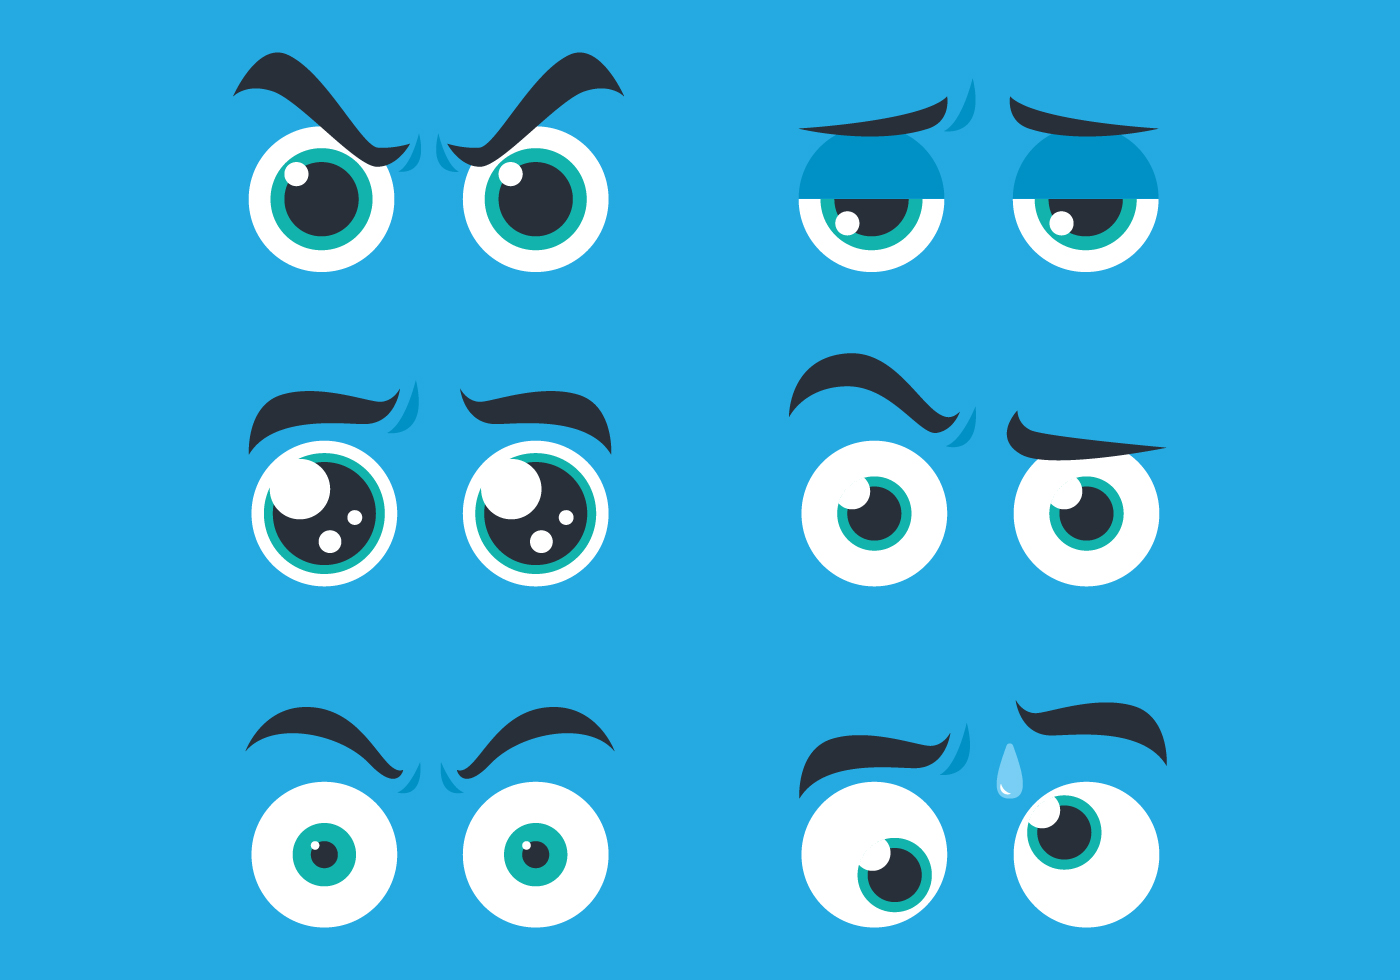 Browse 1,002 incredible Crazy Eye vectors, icons, clipart graphics, and bac...